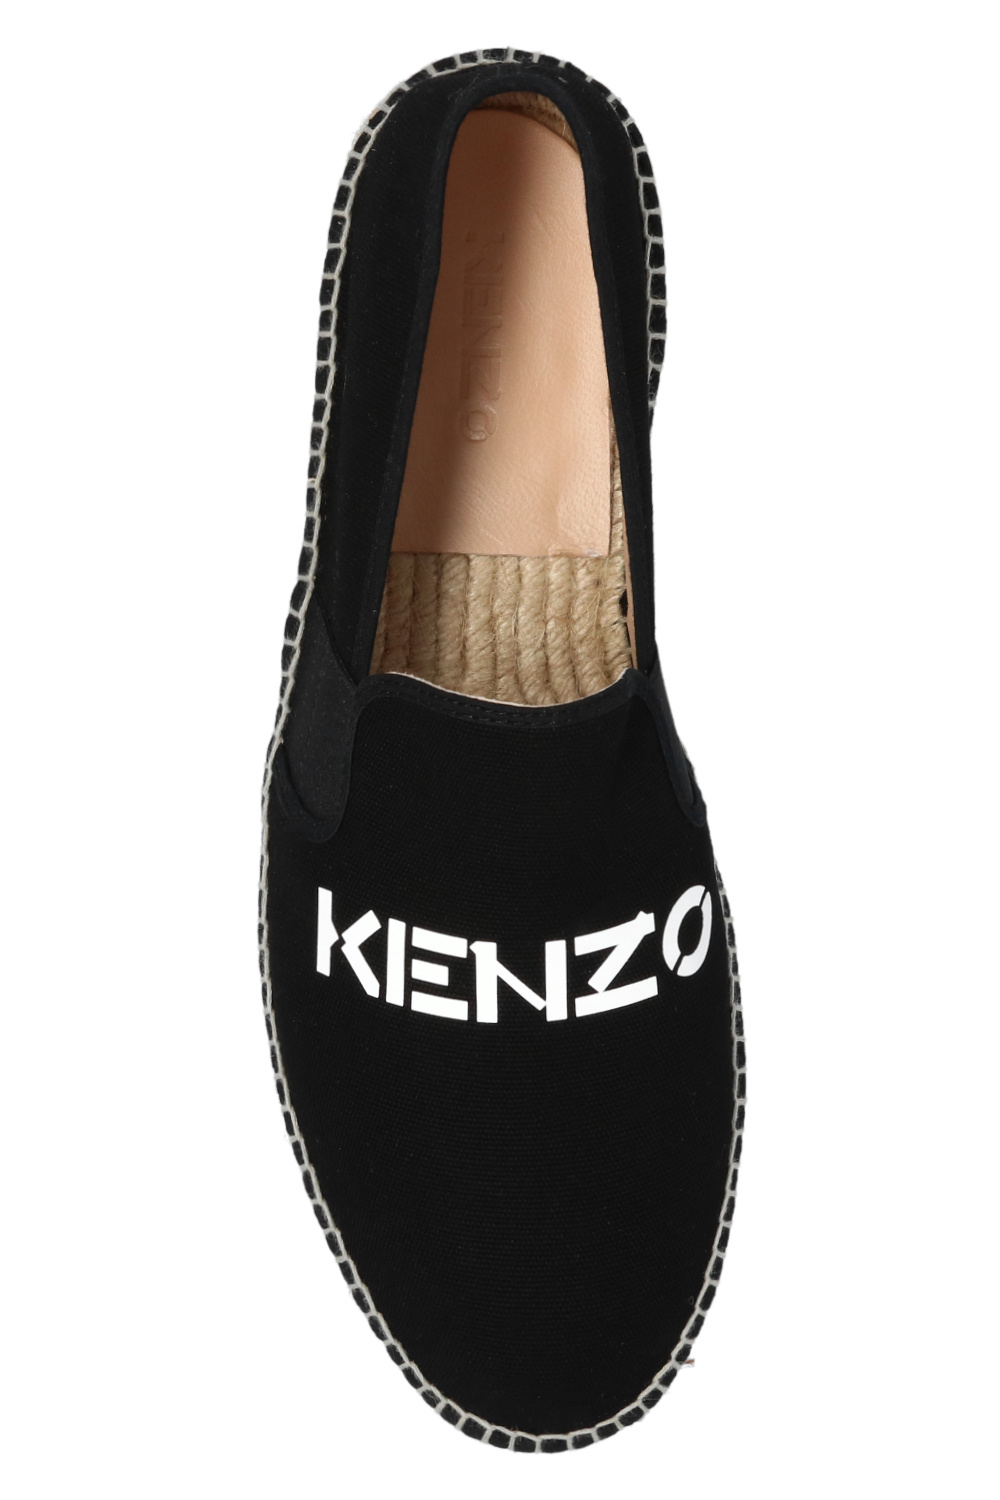 Kenzo Pinko Leather Combat Boots With Studs